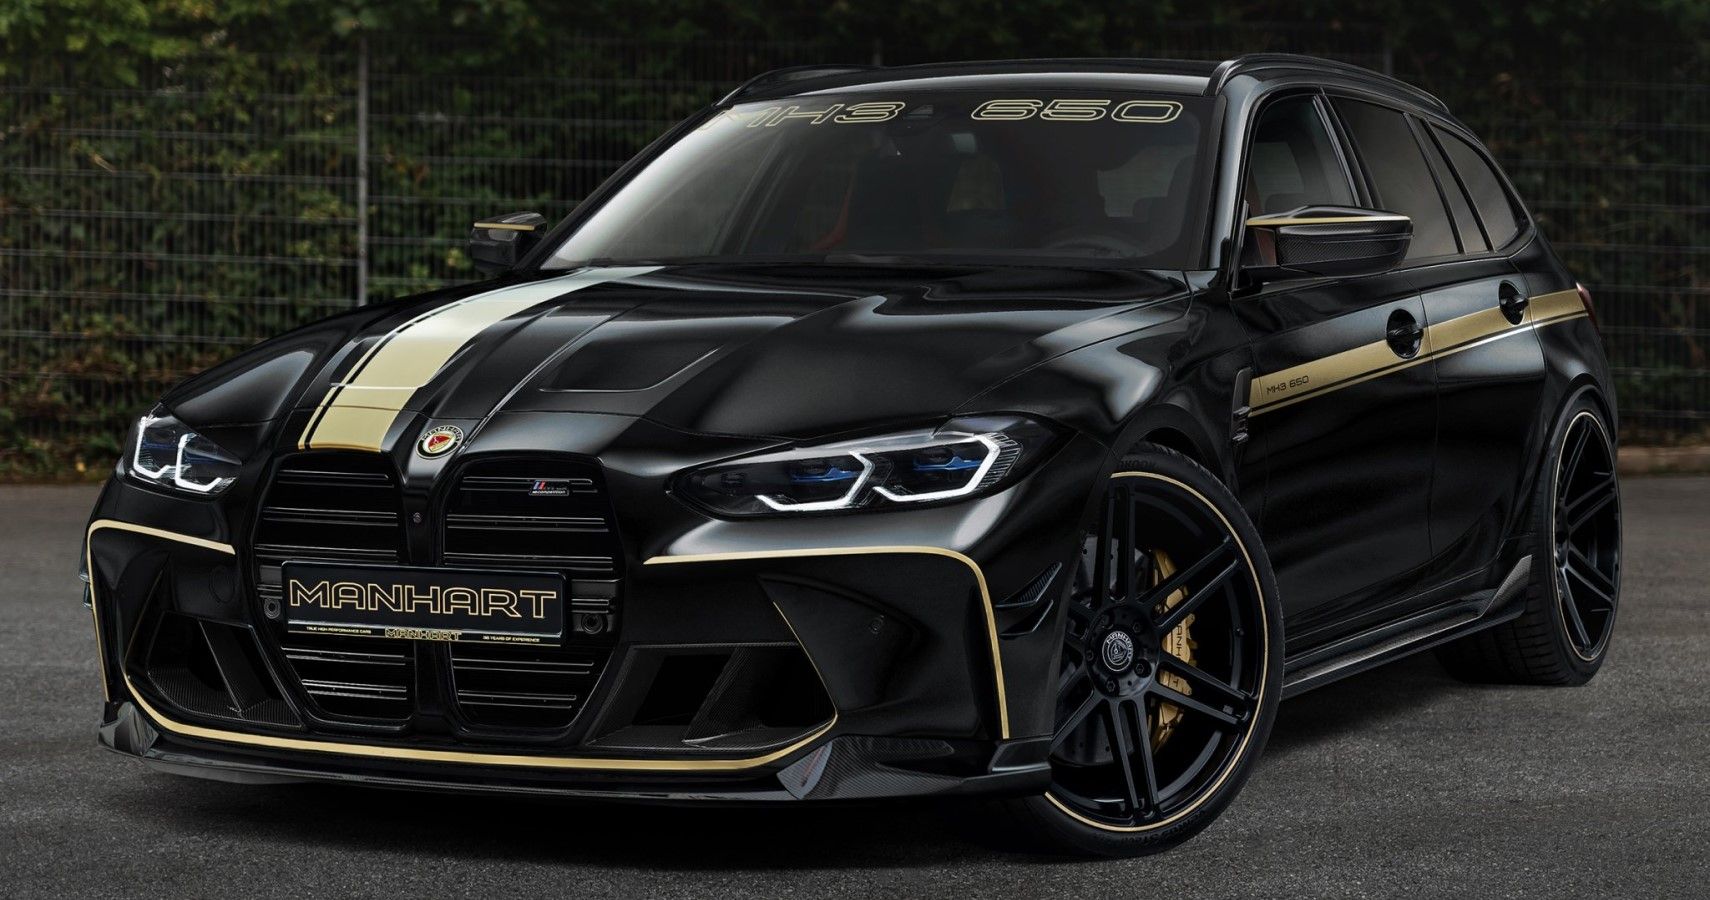 The 650+ Hp BMW M3 Touring By Manhart Is Every Gearhead’s Custom Car Dream